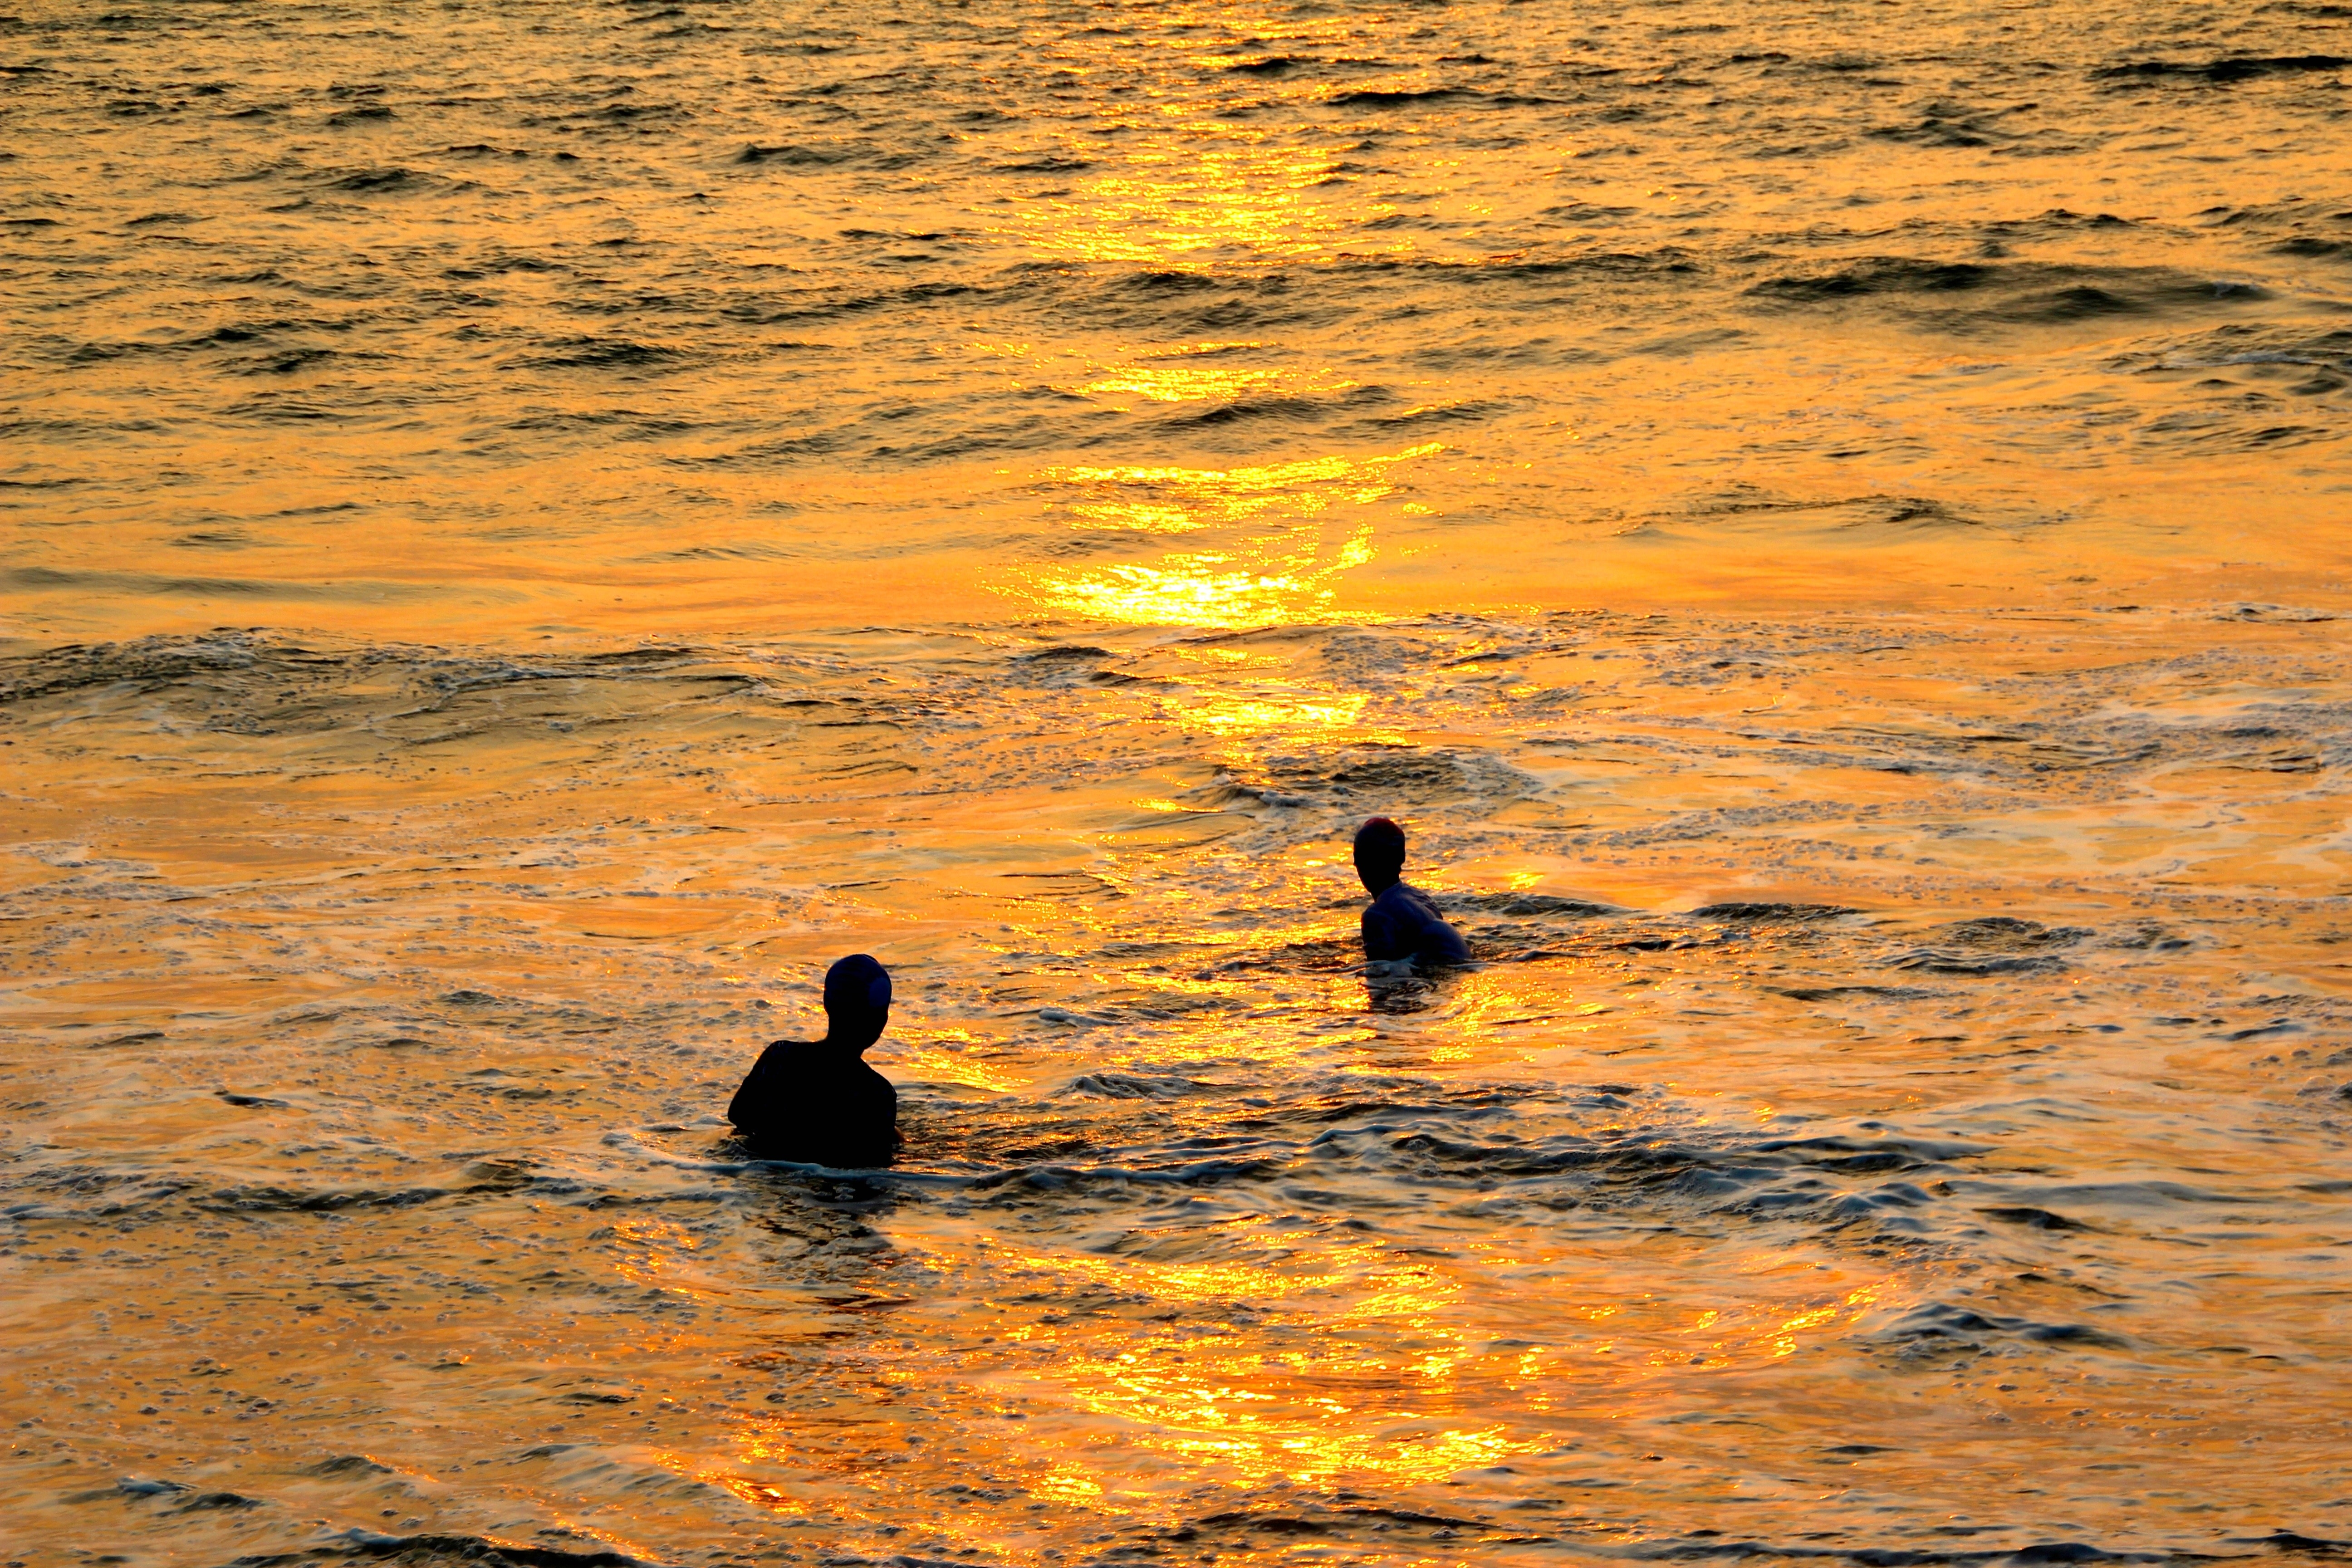 two men in body of water during sunset